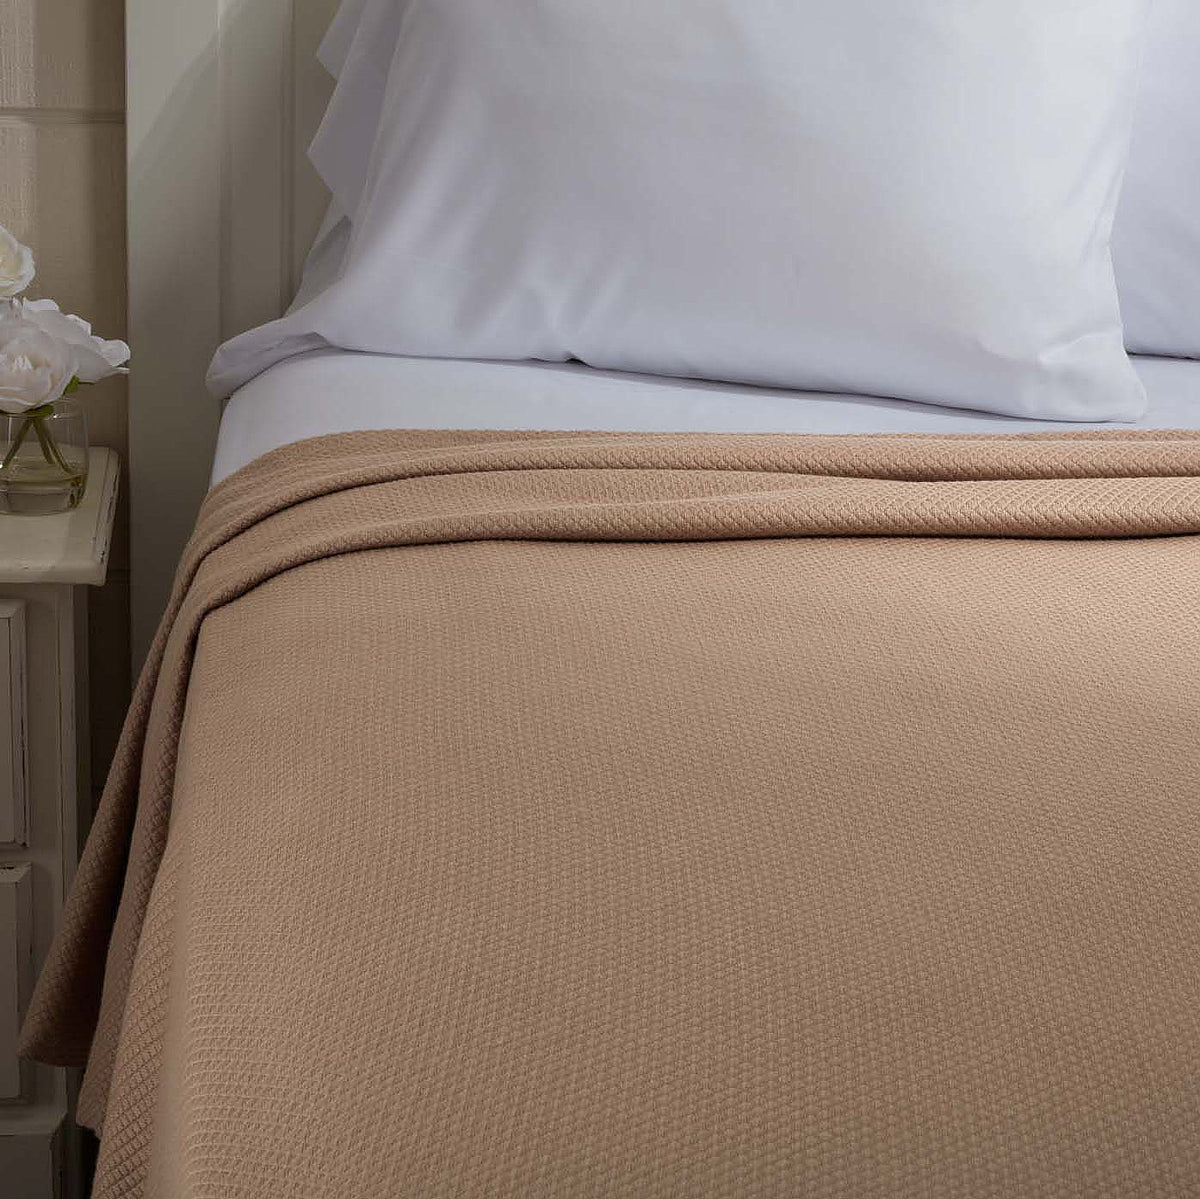 April & Olive Serenity Tan Queen Cotton Woven Blanket 90x90 By VHC Brands